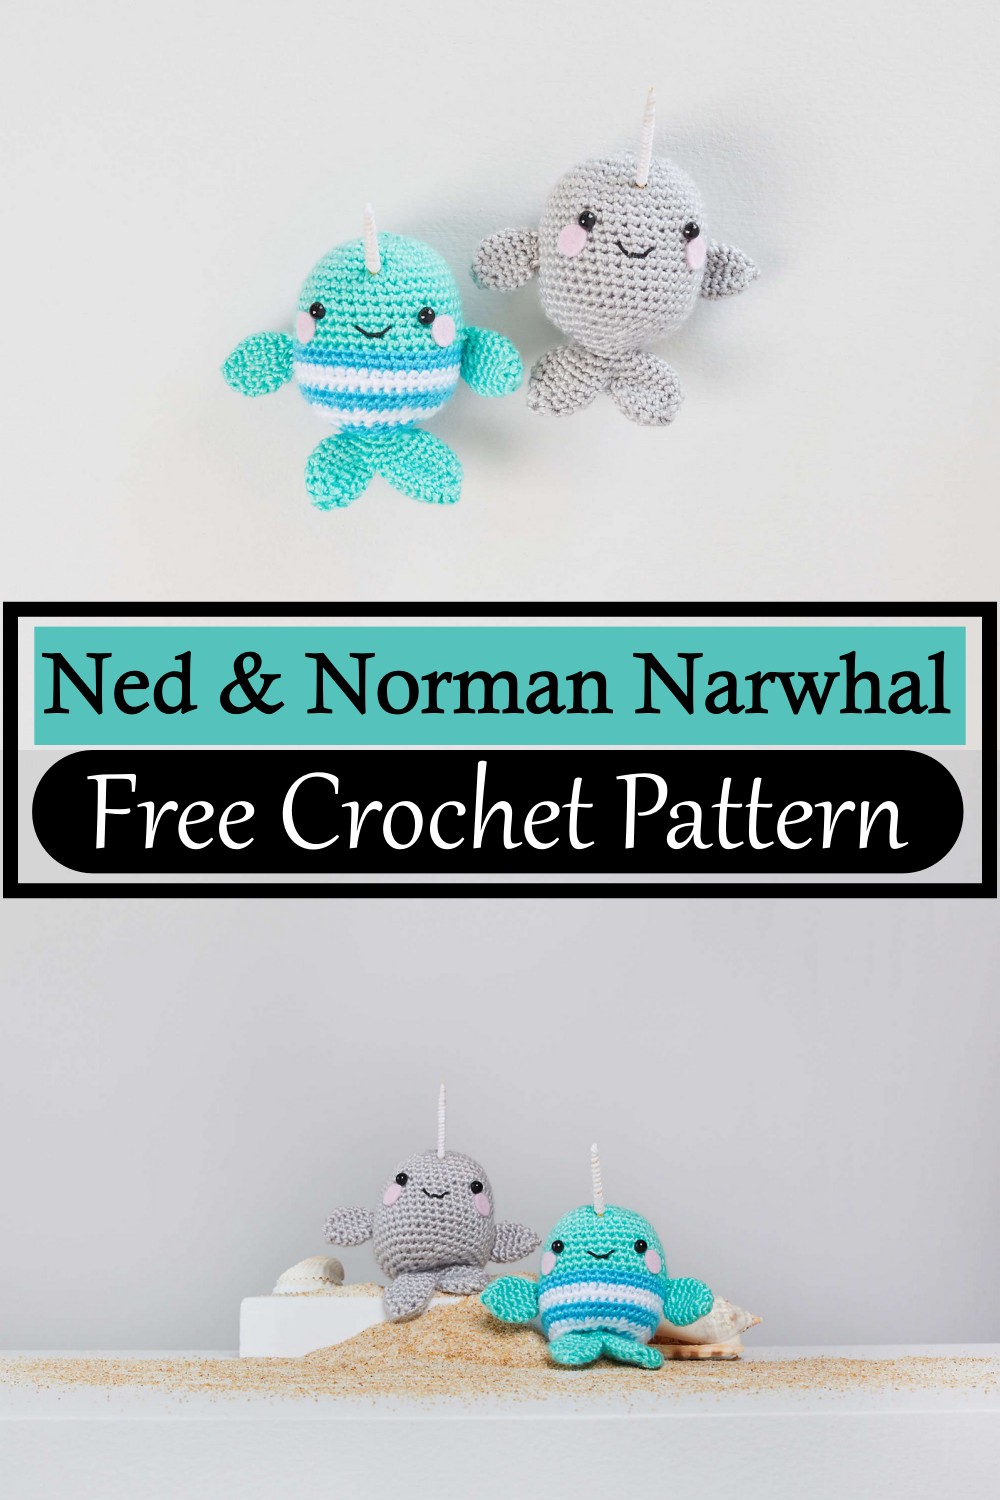 Ned & Norman Narwhal